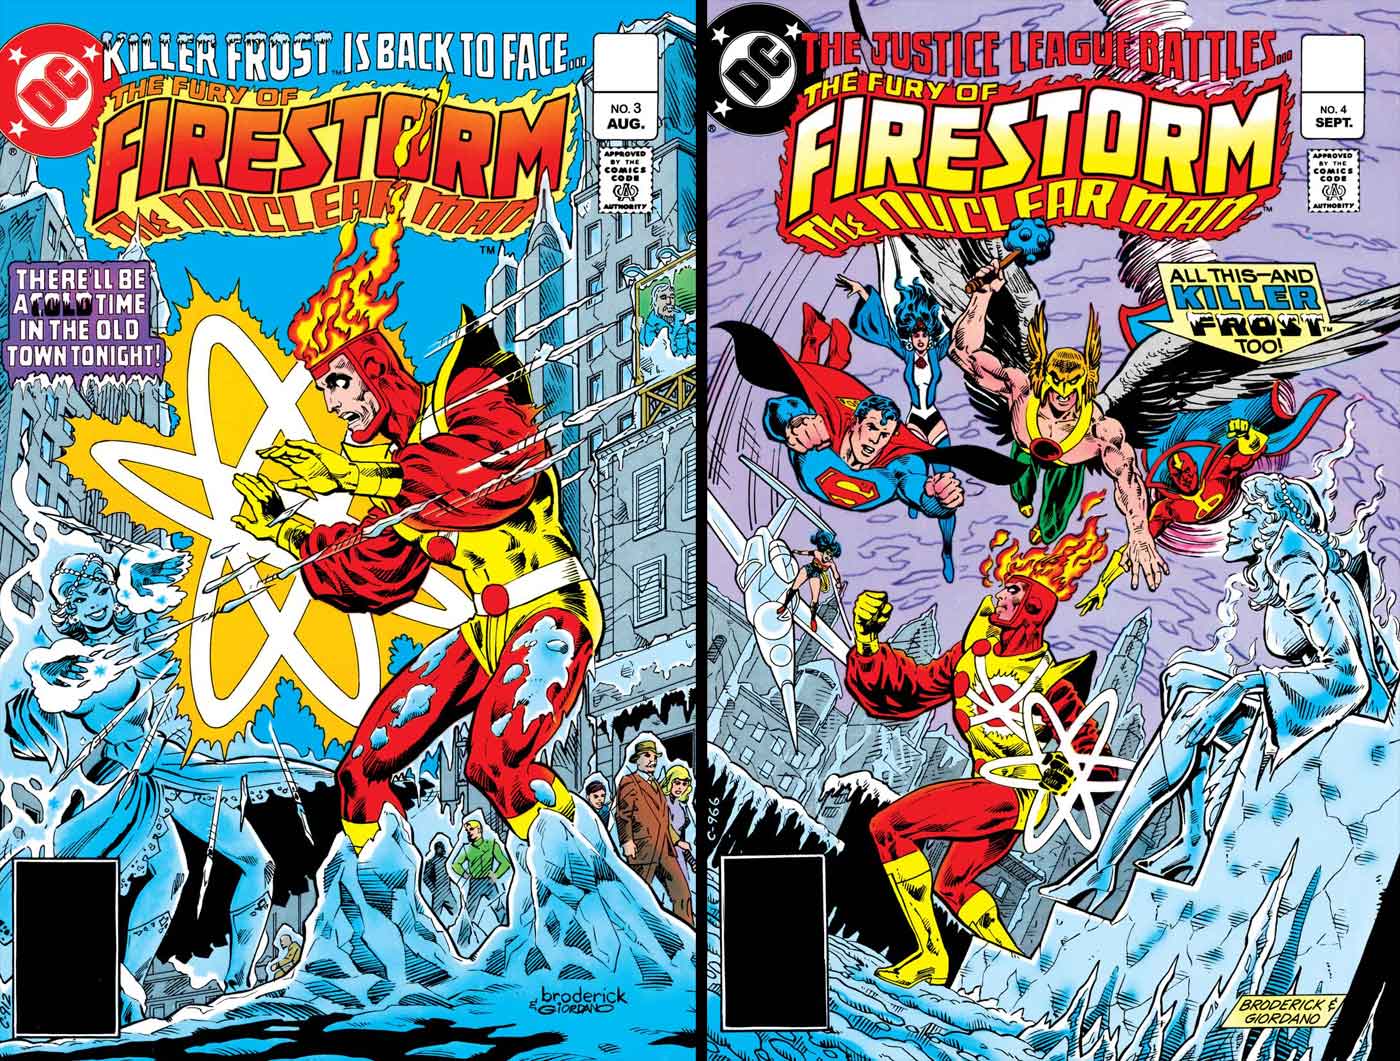 Fury of Firestorm #3 & #4 (cover dated Aug & Sept 1982) by Gerry Conway, Pat Broderick, and Rodin Rodriguez